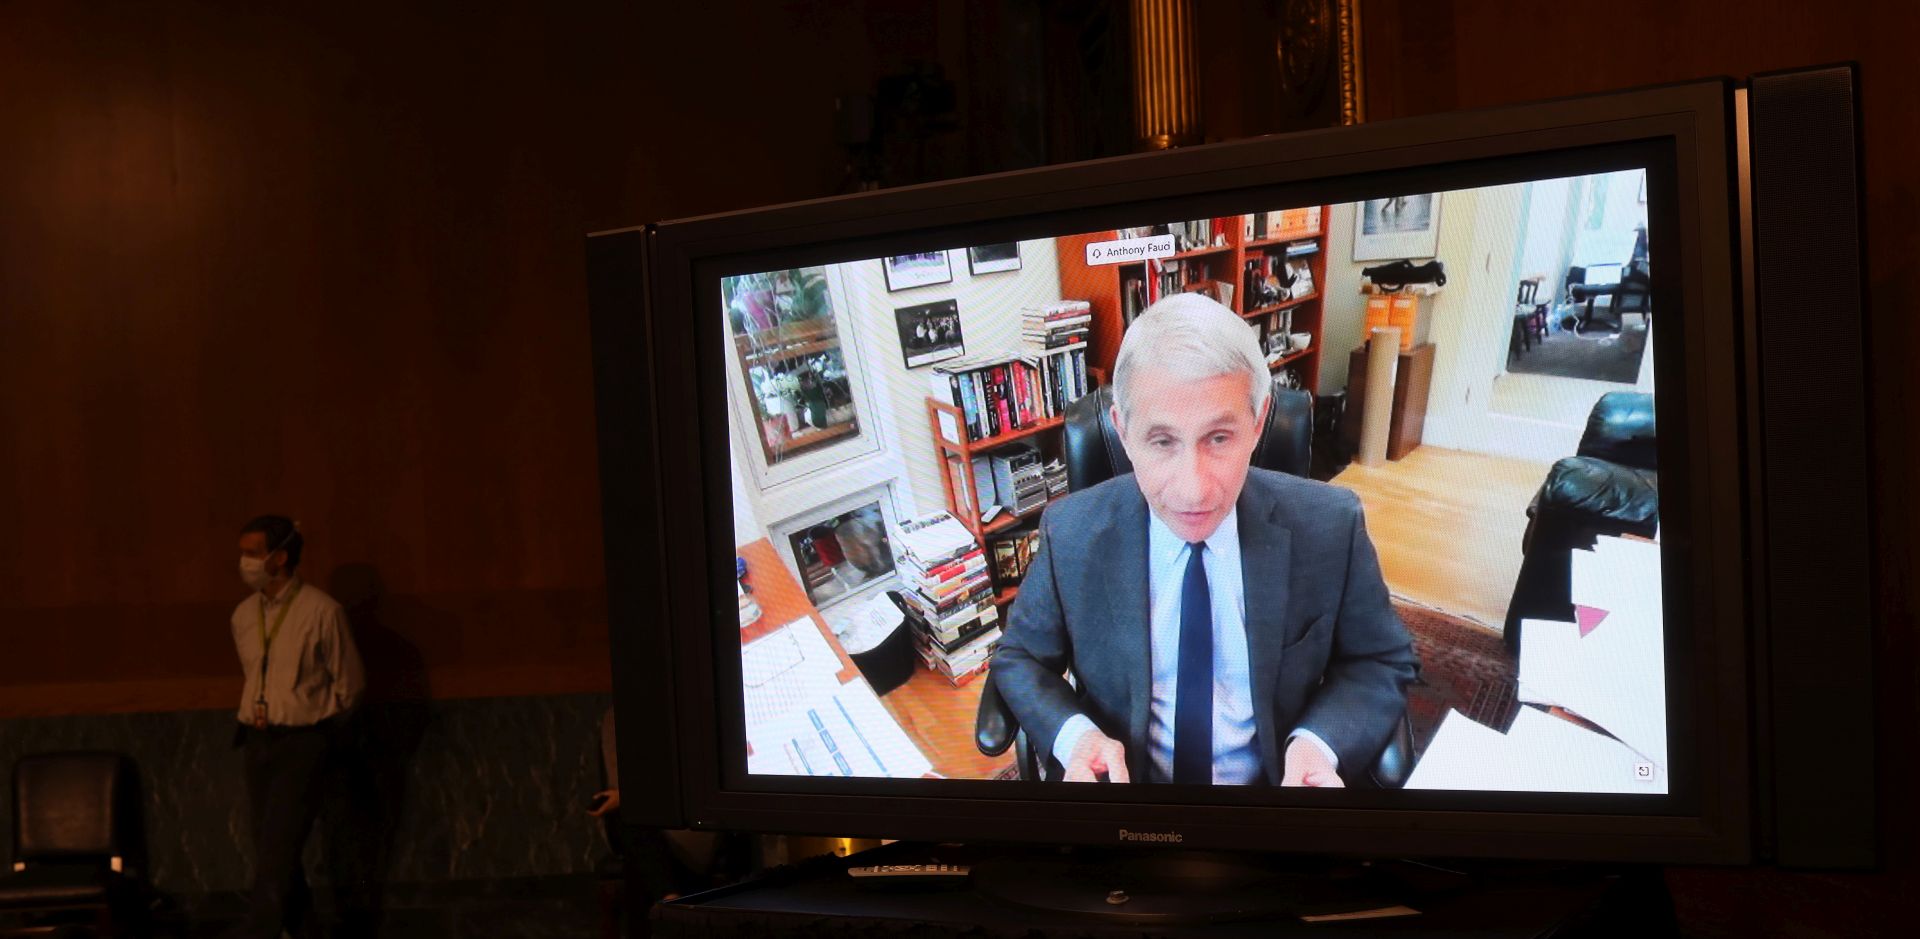 epa08417334 Dr. Anthony Fauci, director of the National Institute of Allergy and Infectious Diseases speaks remotely during a Senate Health, Education, Labor and Pensions (HELP) Committee hearing on Capitol Hill in Washington, DC, USA, 12 May 2020. The committee is hearing testimony from members of the White House Coronavirus Task Force on how to safely open the country and get America back to work and school.  EPA/WIN MCNAMEE / POOL